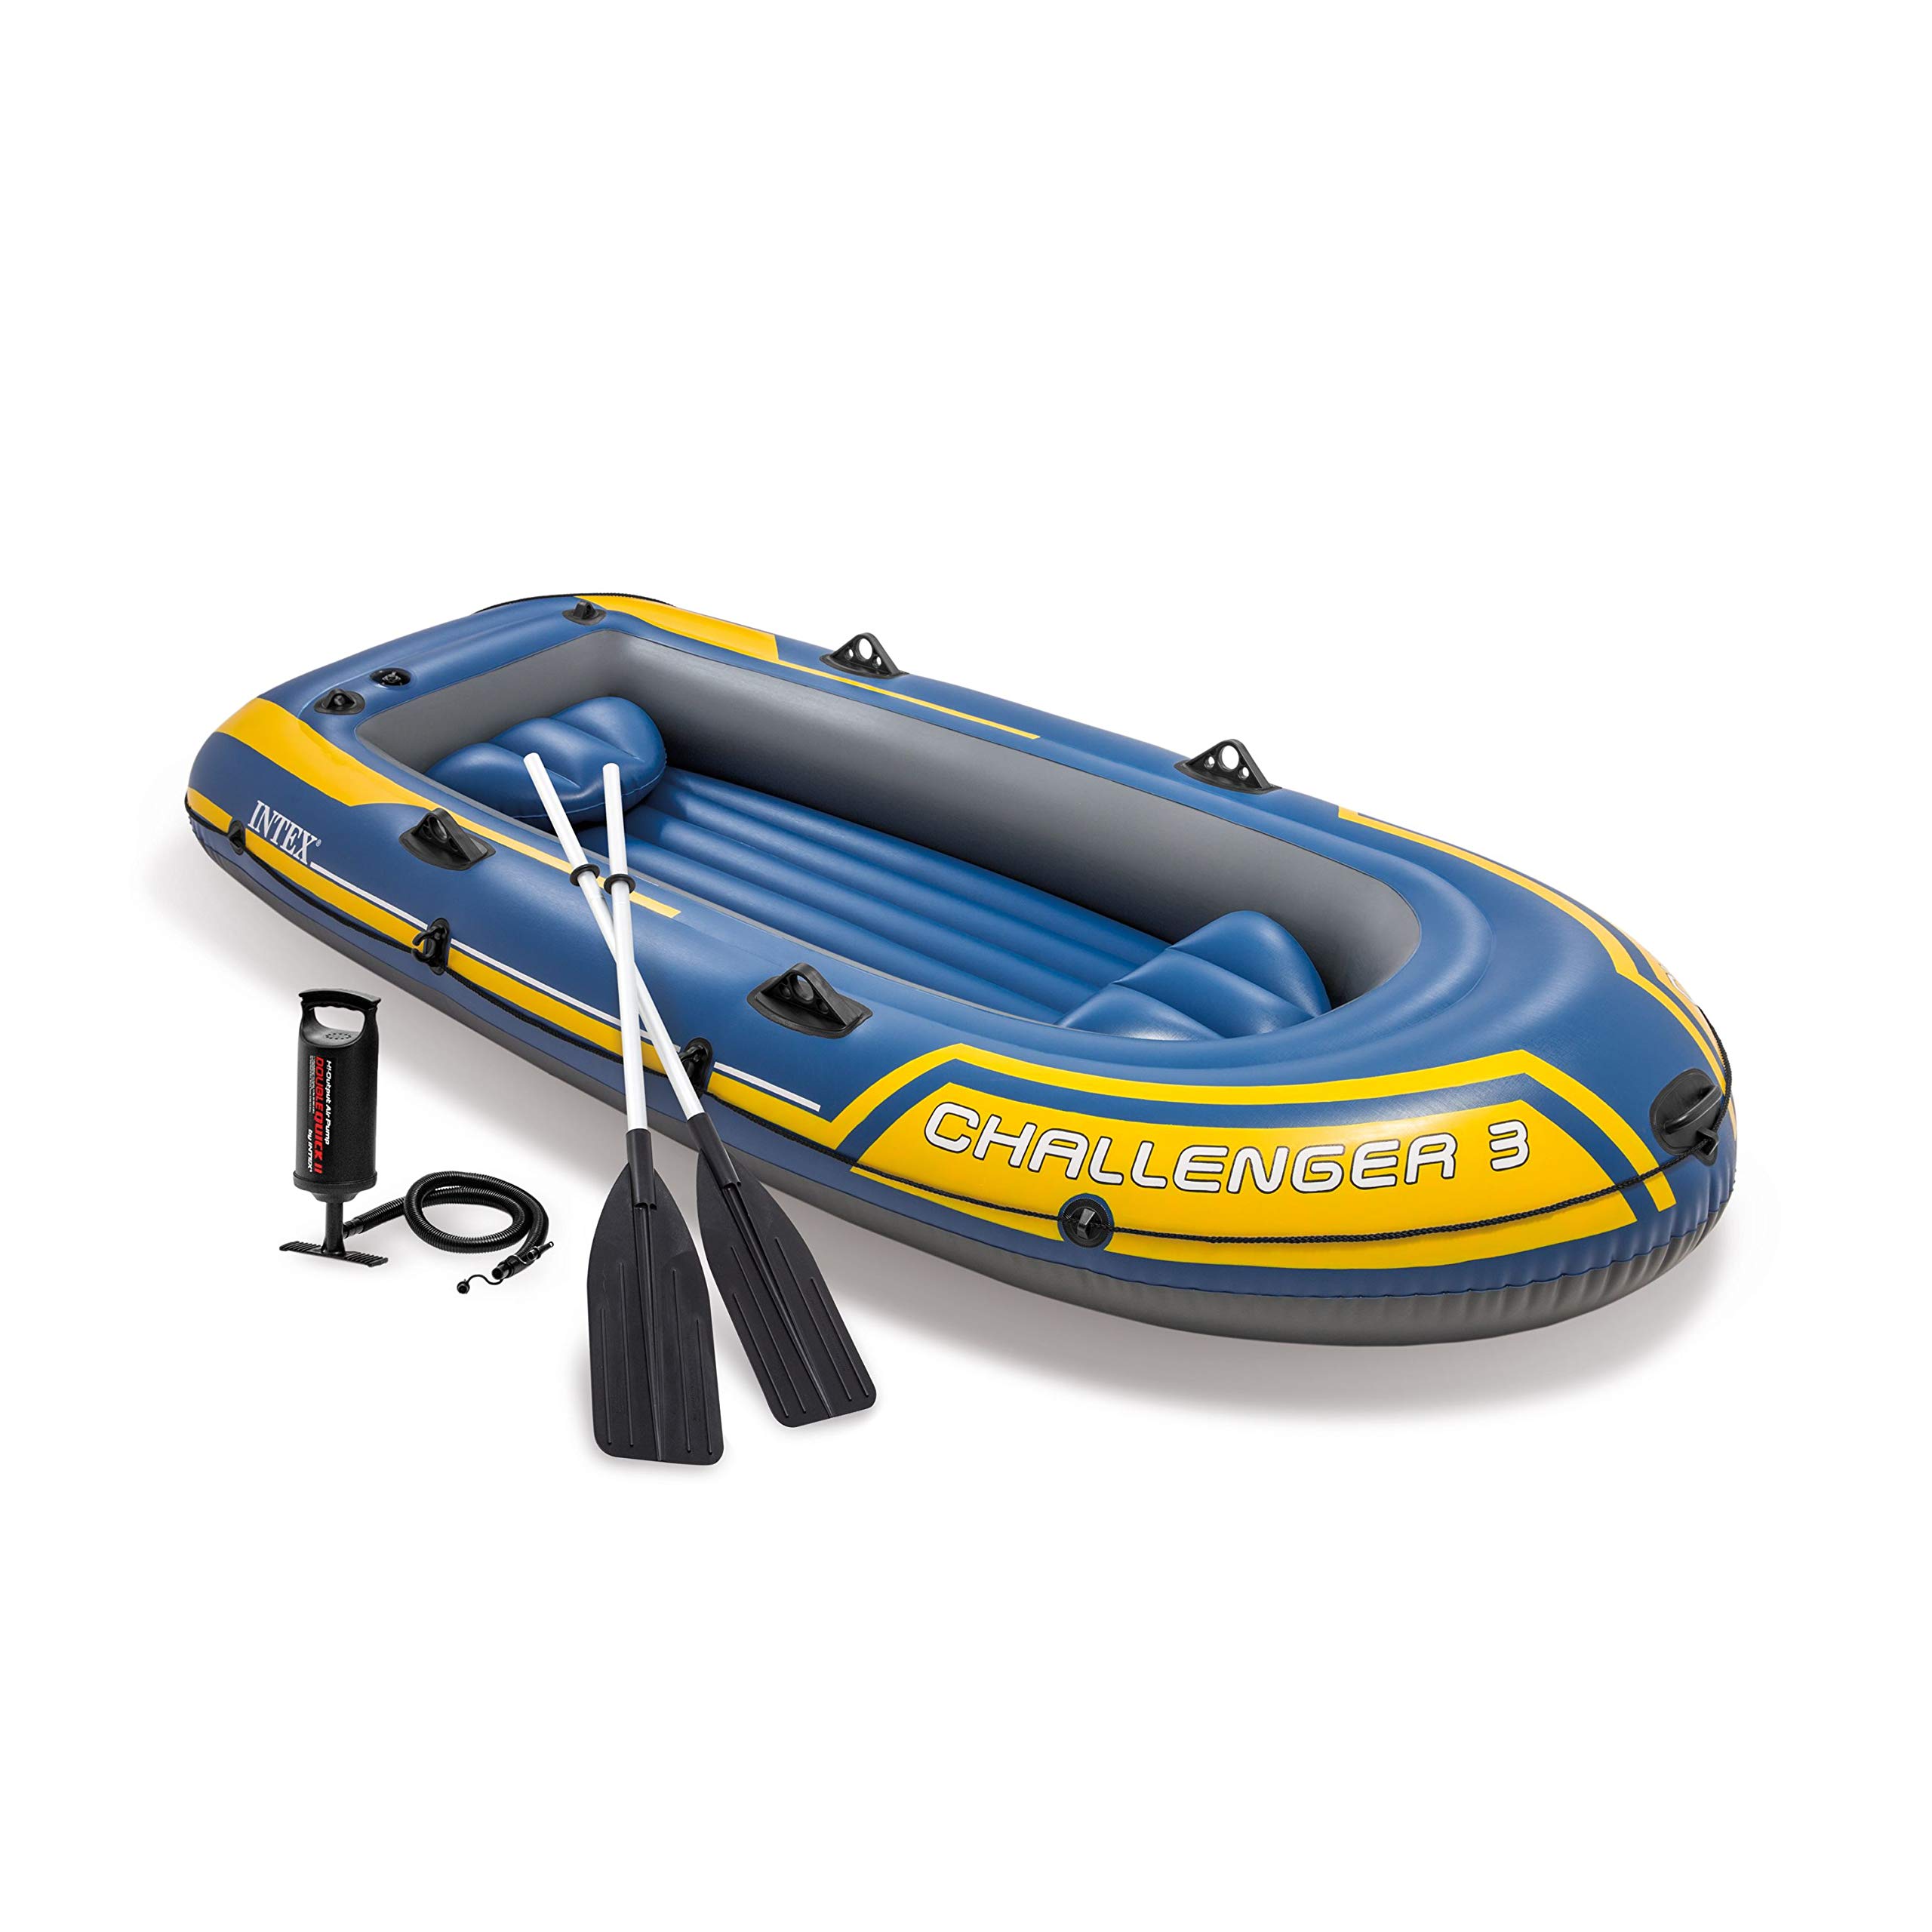 INTEX Challenger Inflatable Boat Series: Includes Deluxe Aluminum Oars and High-Output Pump – SuperStrong PVC – Triple Air Chambers – Welded Oar Locks – Heavy Duty Grab Handle